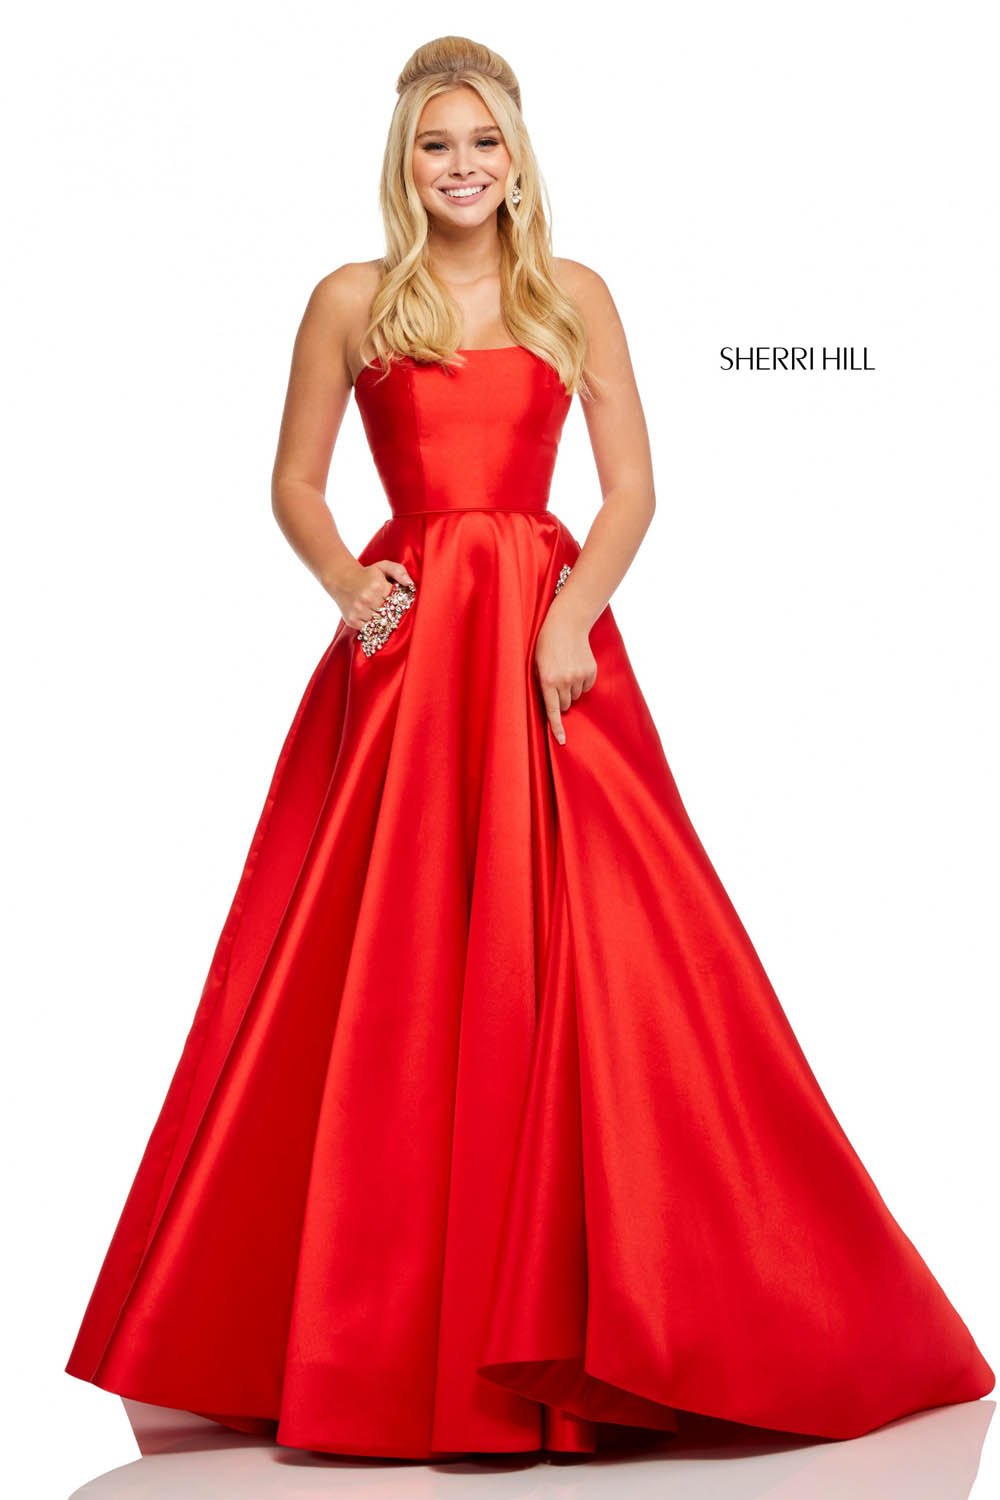 Sherri Hill 52724 dress images in these colors: Black, Light Blue, Yellow, Red, Lilac, Navy.